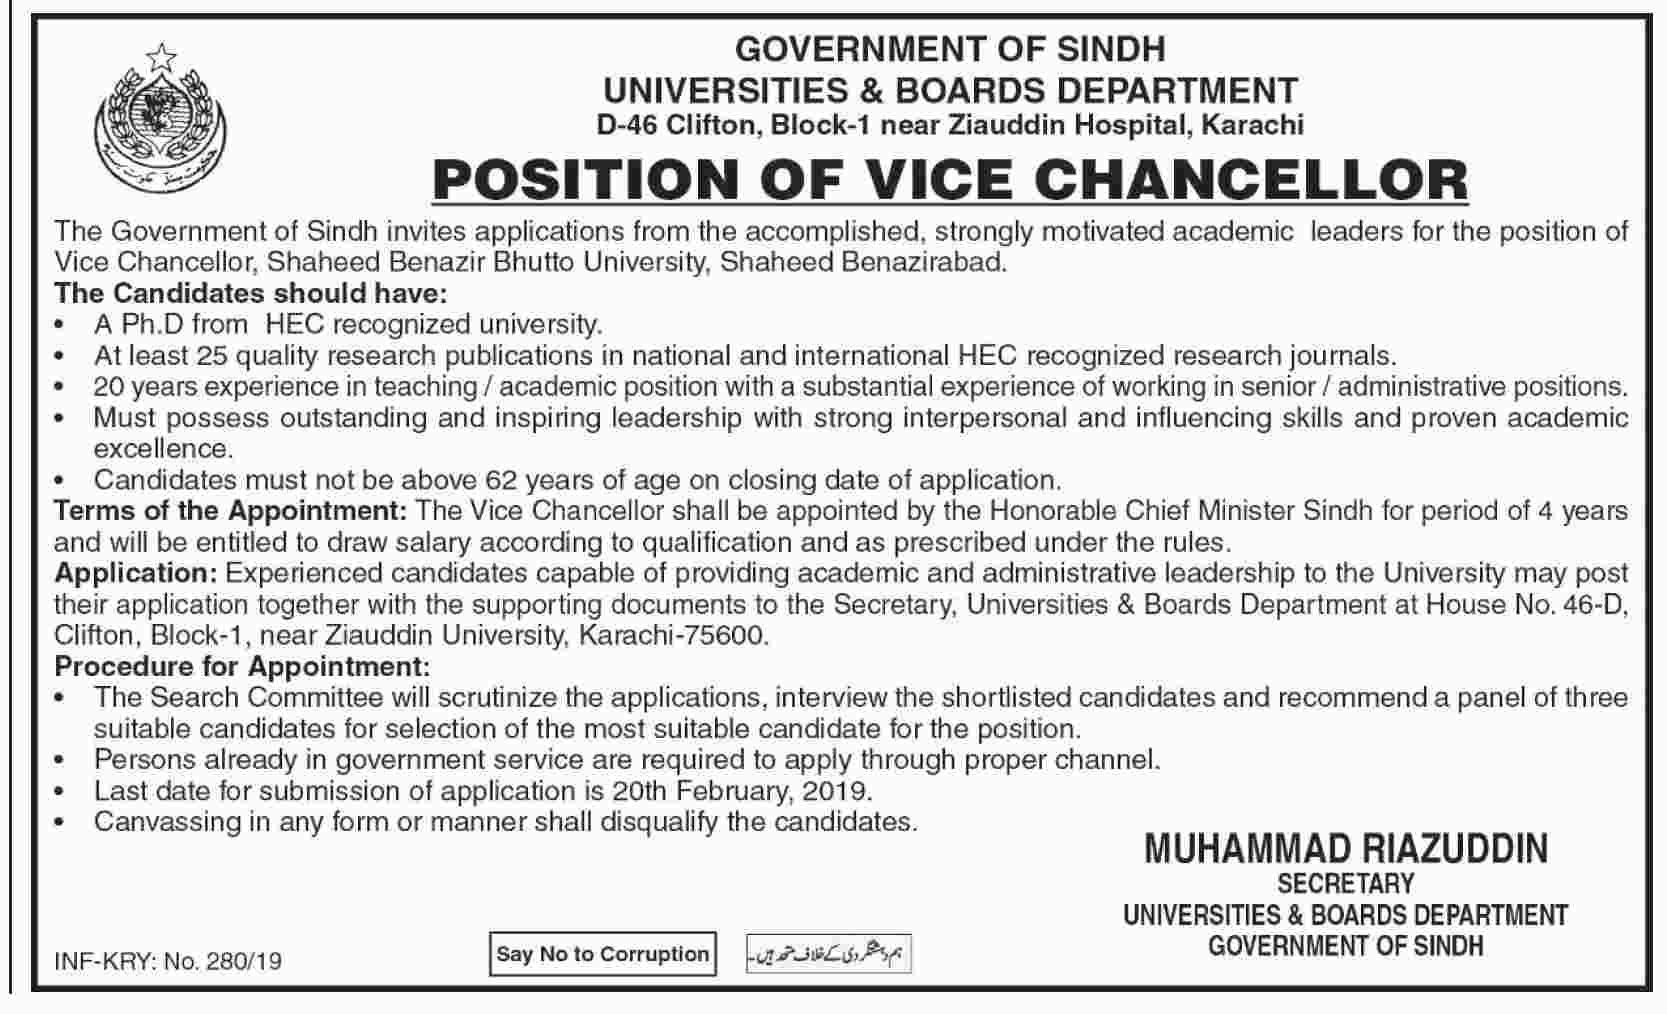 GOVERNMENT OF SINDH UNIVERSITIES & BOARDS DEPARTMENT JOBS